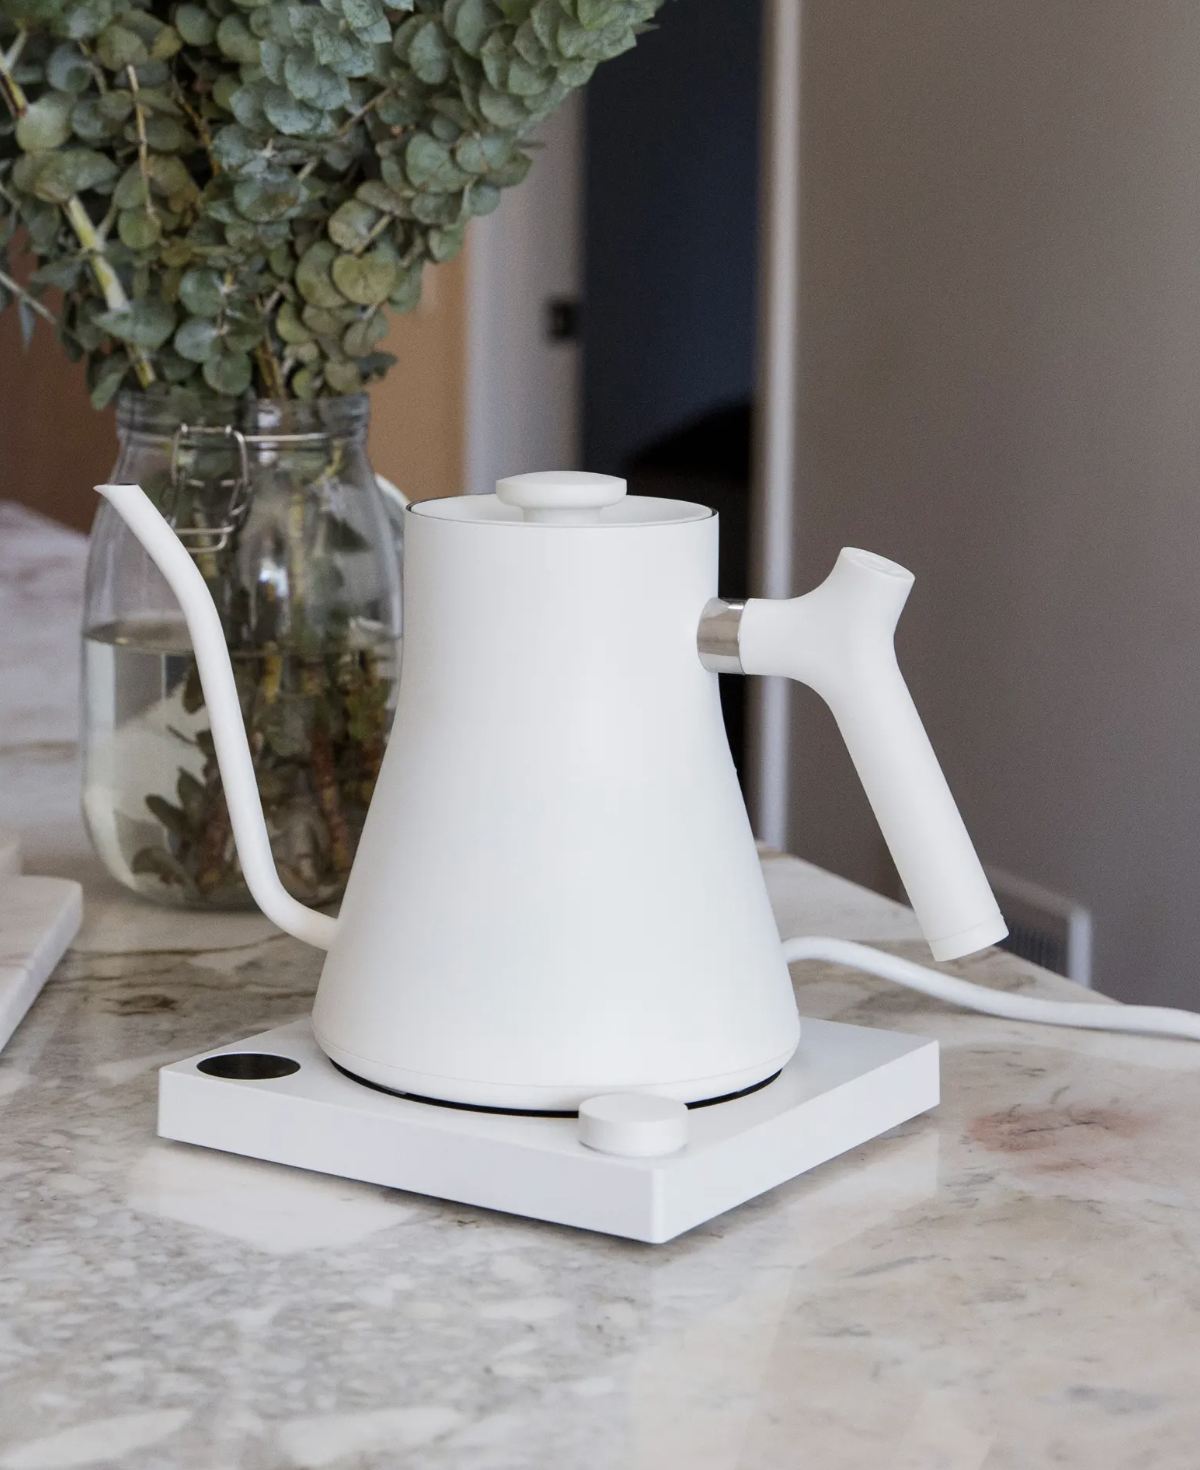 The kettle on a counter with a bouquet of eucalyptus